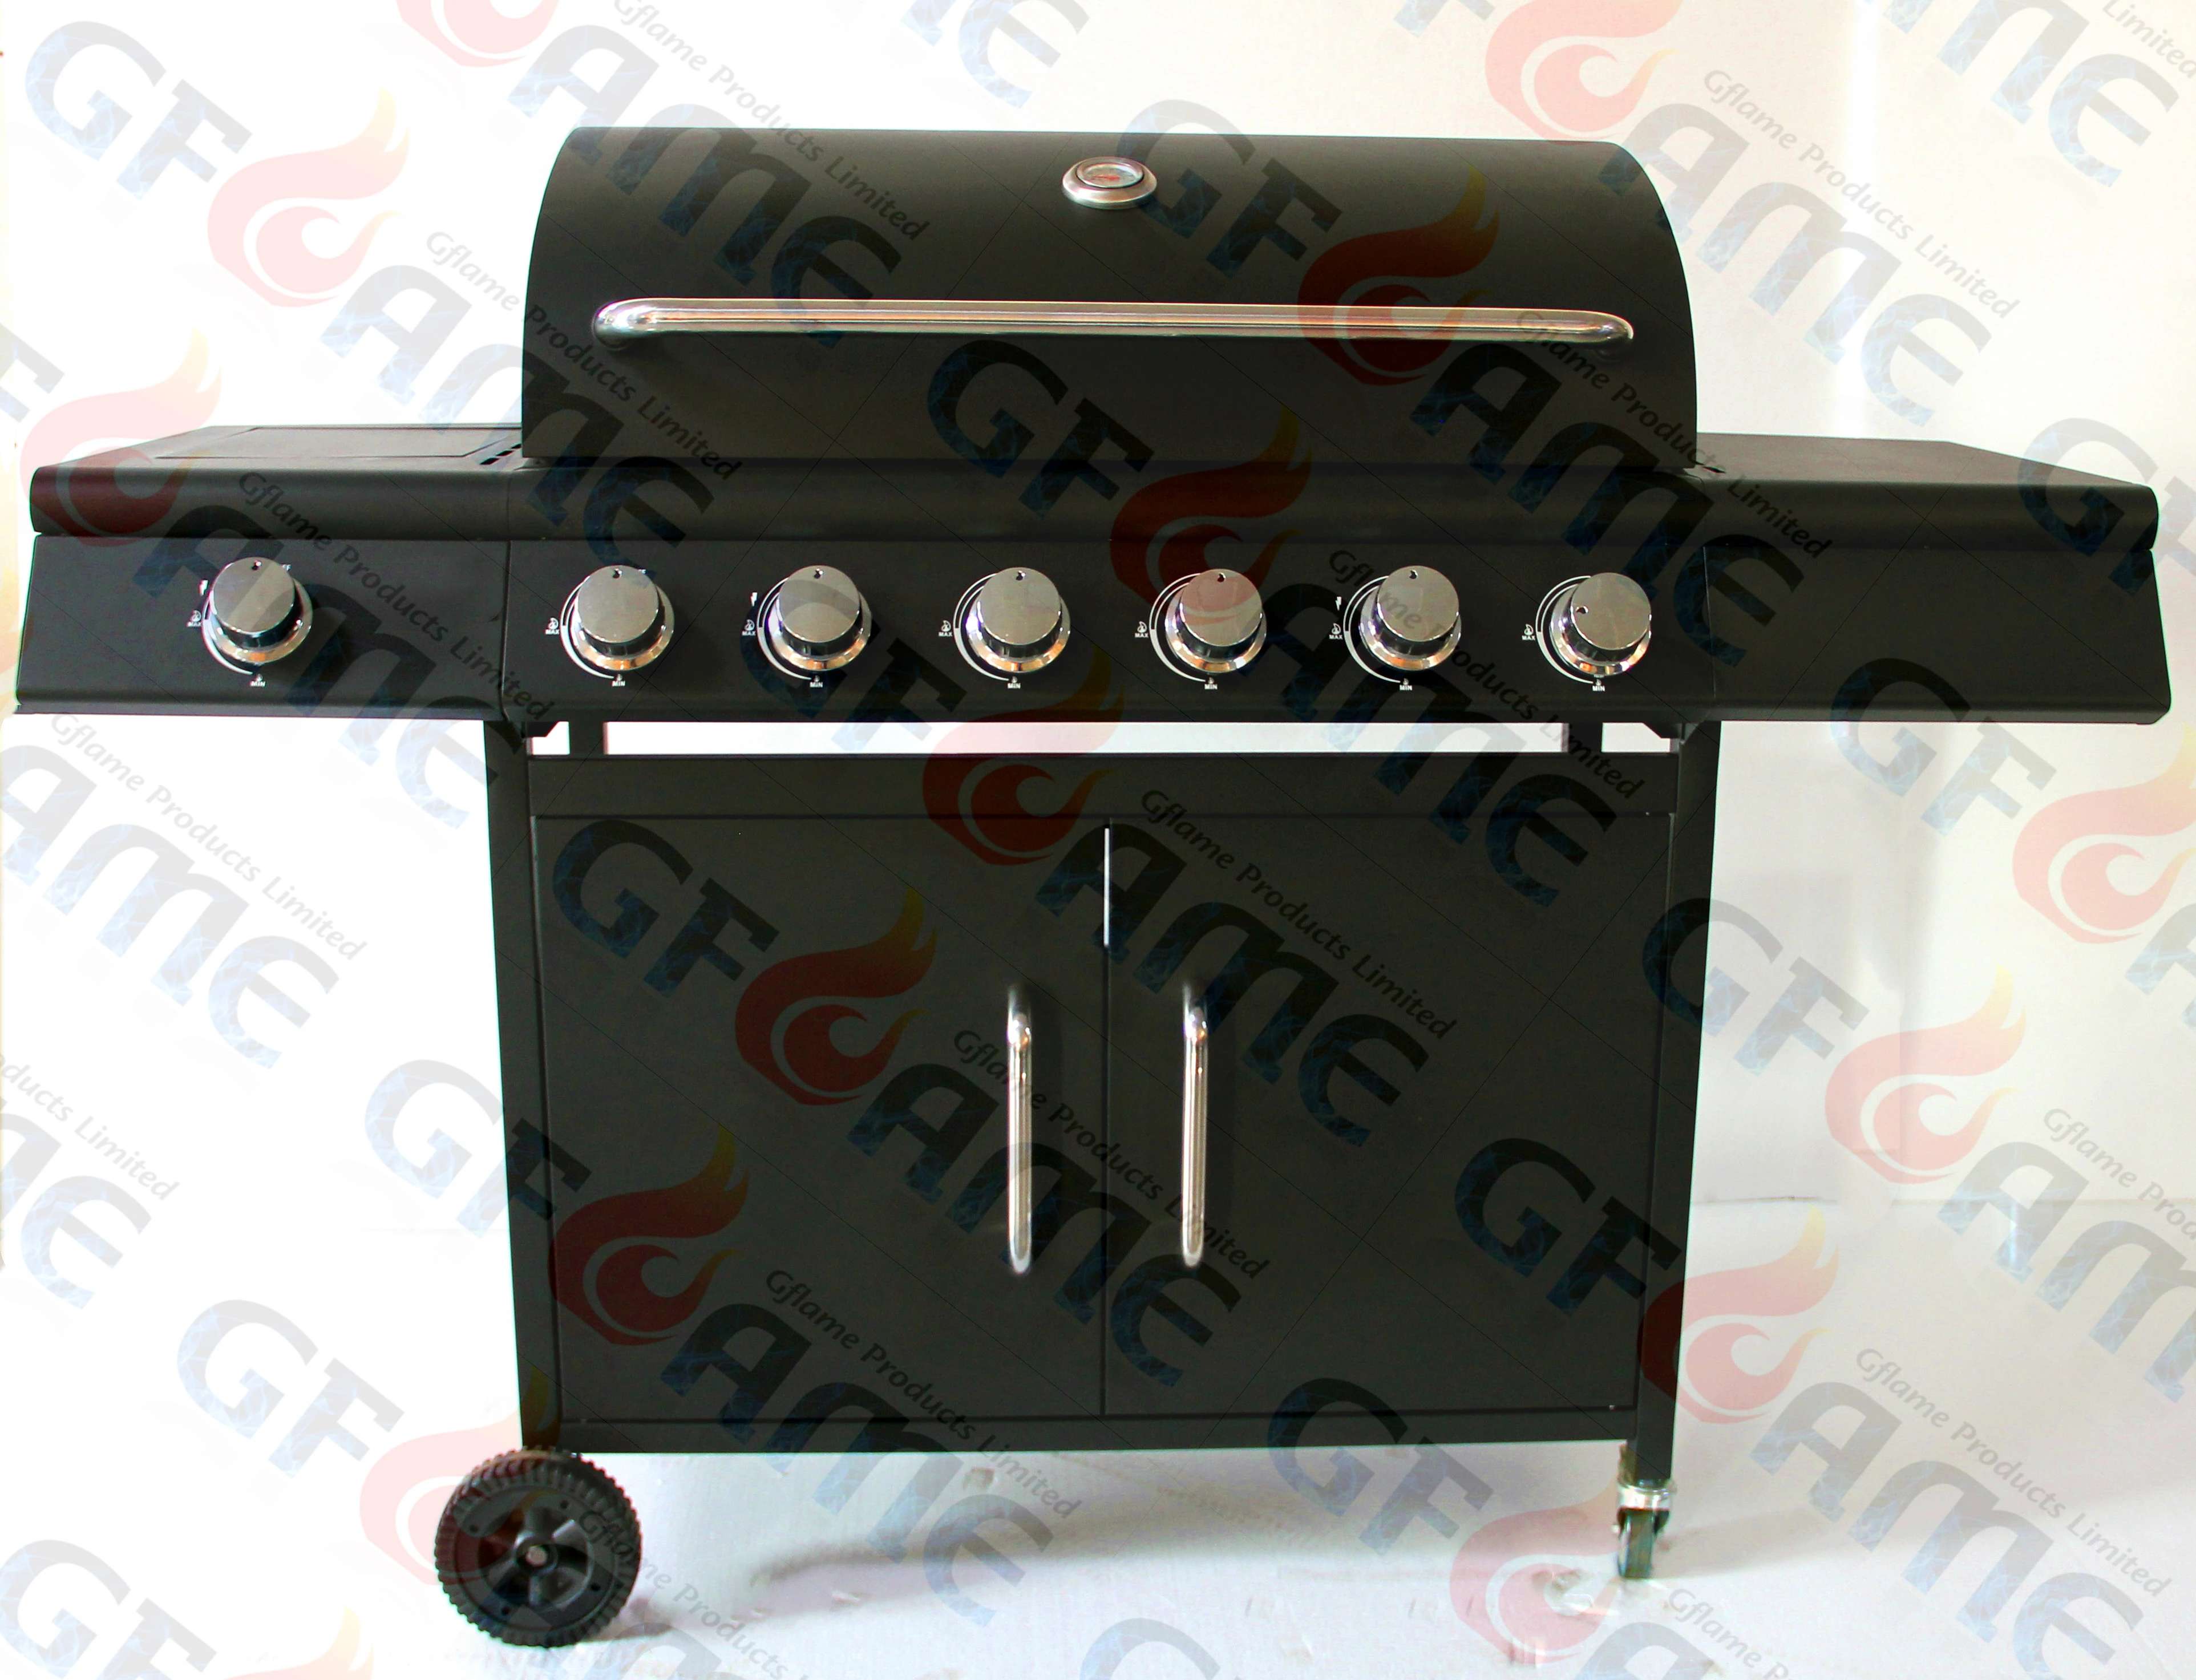 Outdoor BBQ gas grill